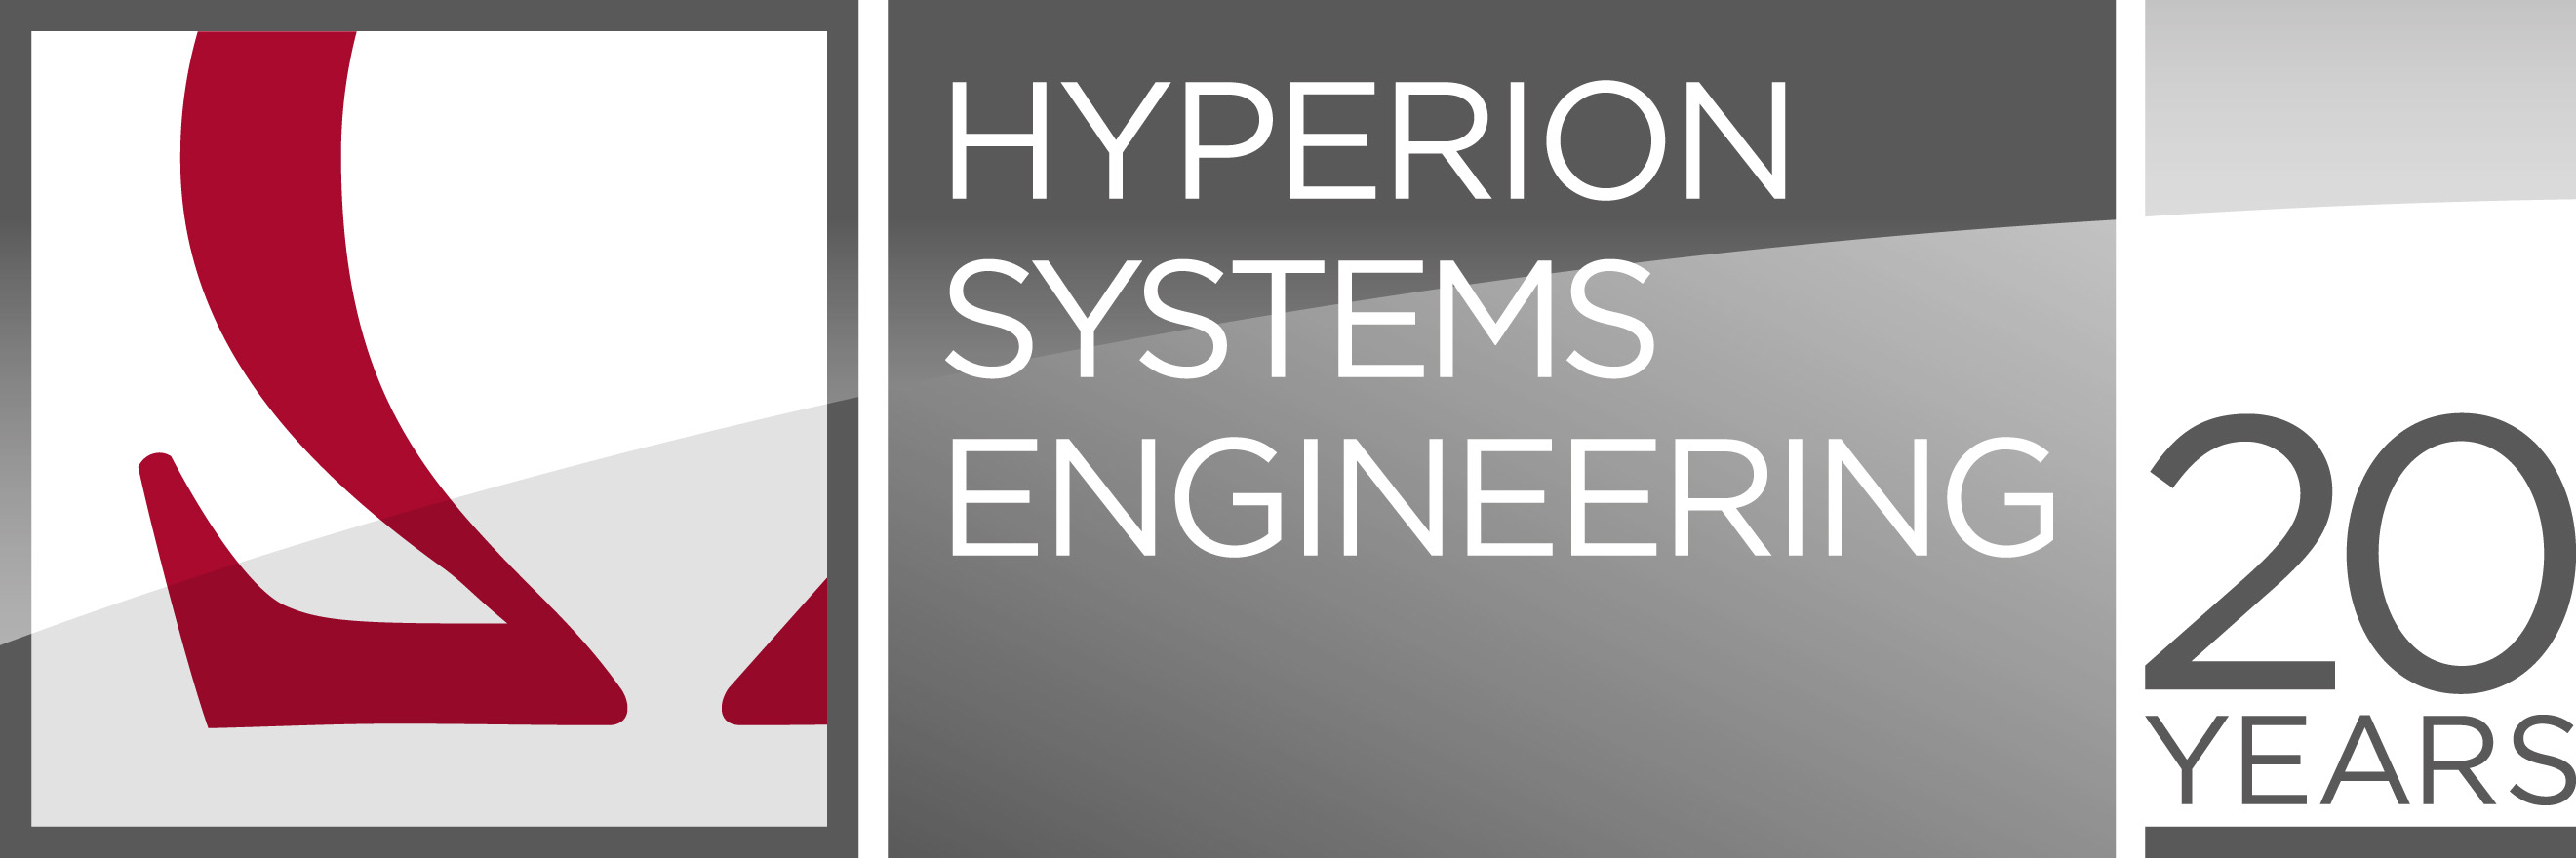 Hyperion Systems Engineering Group